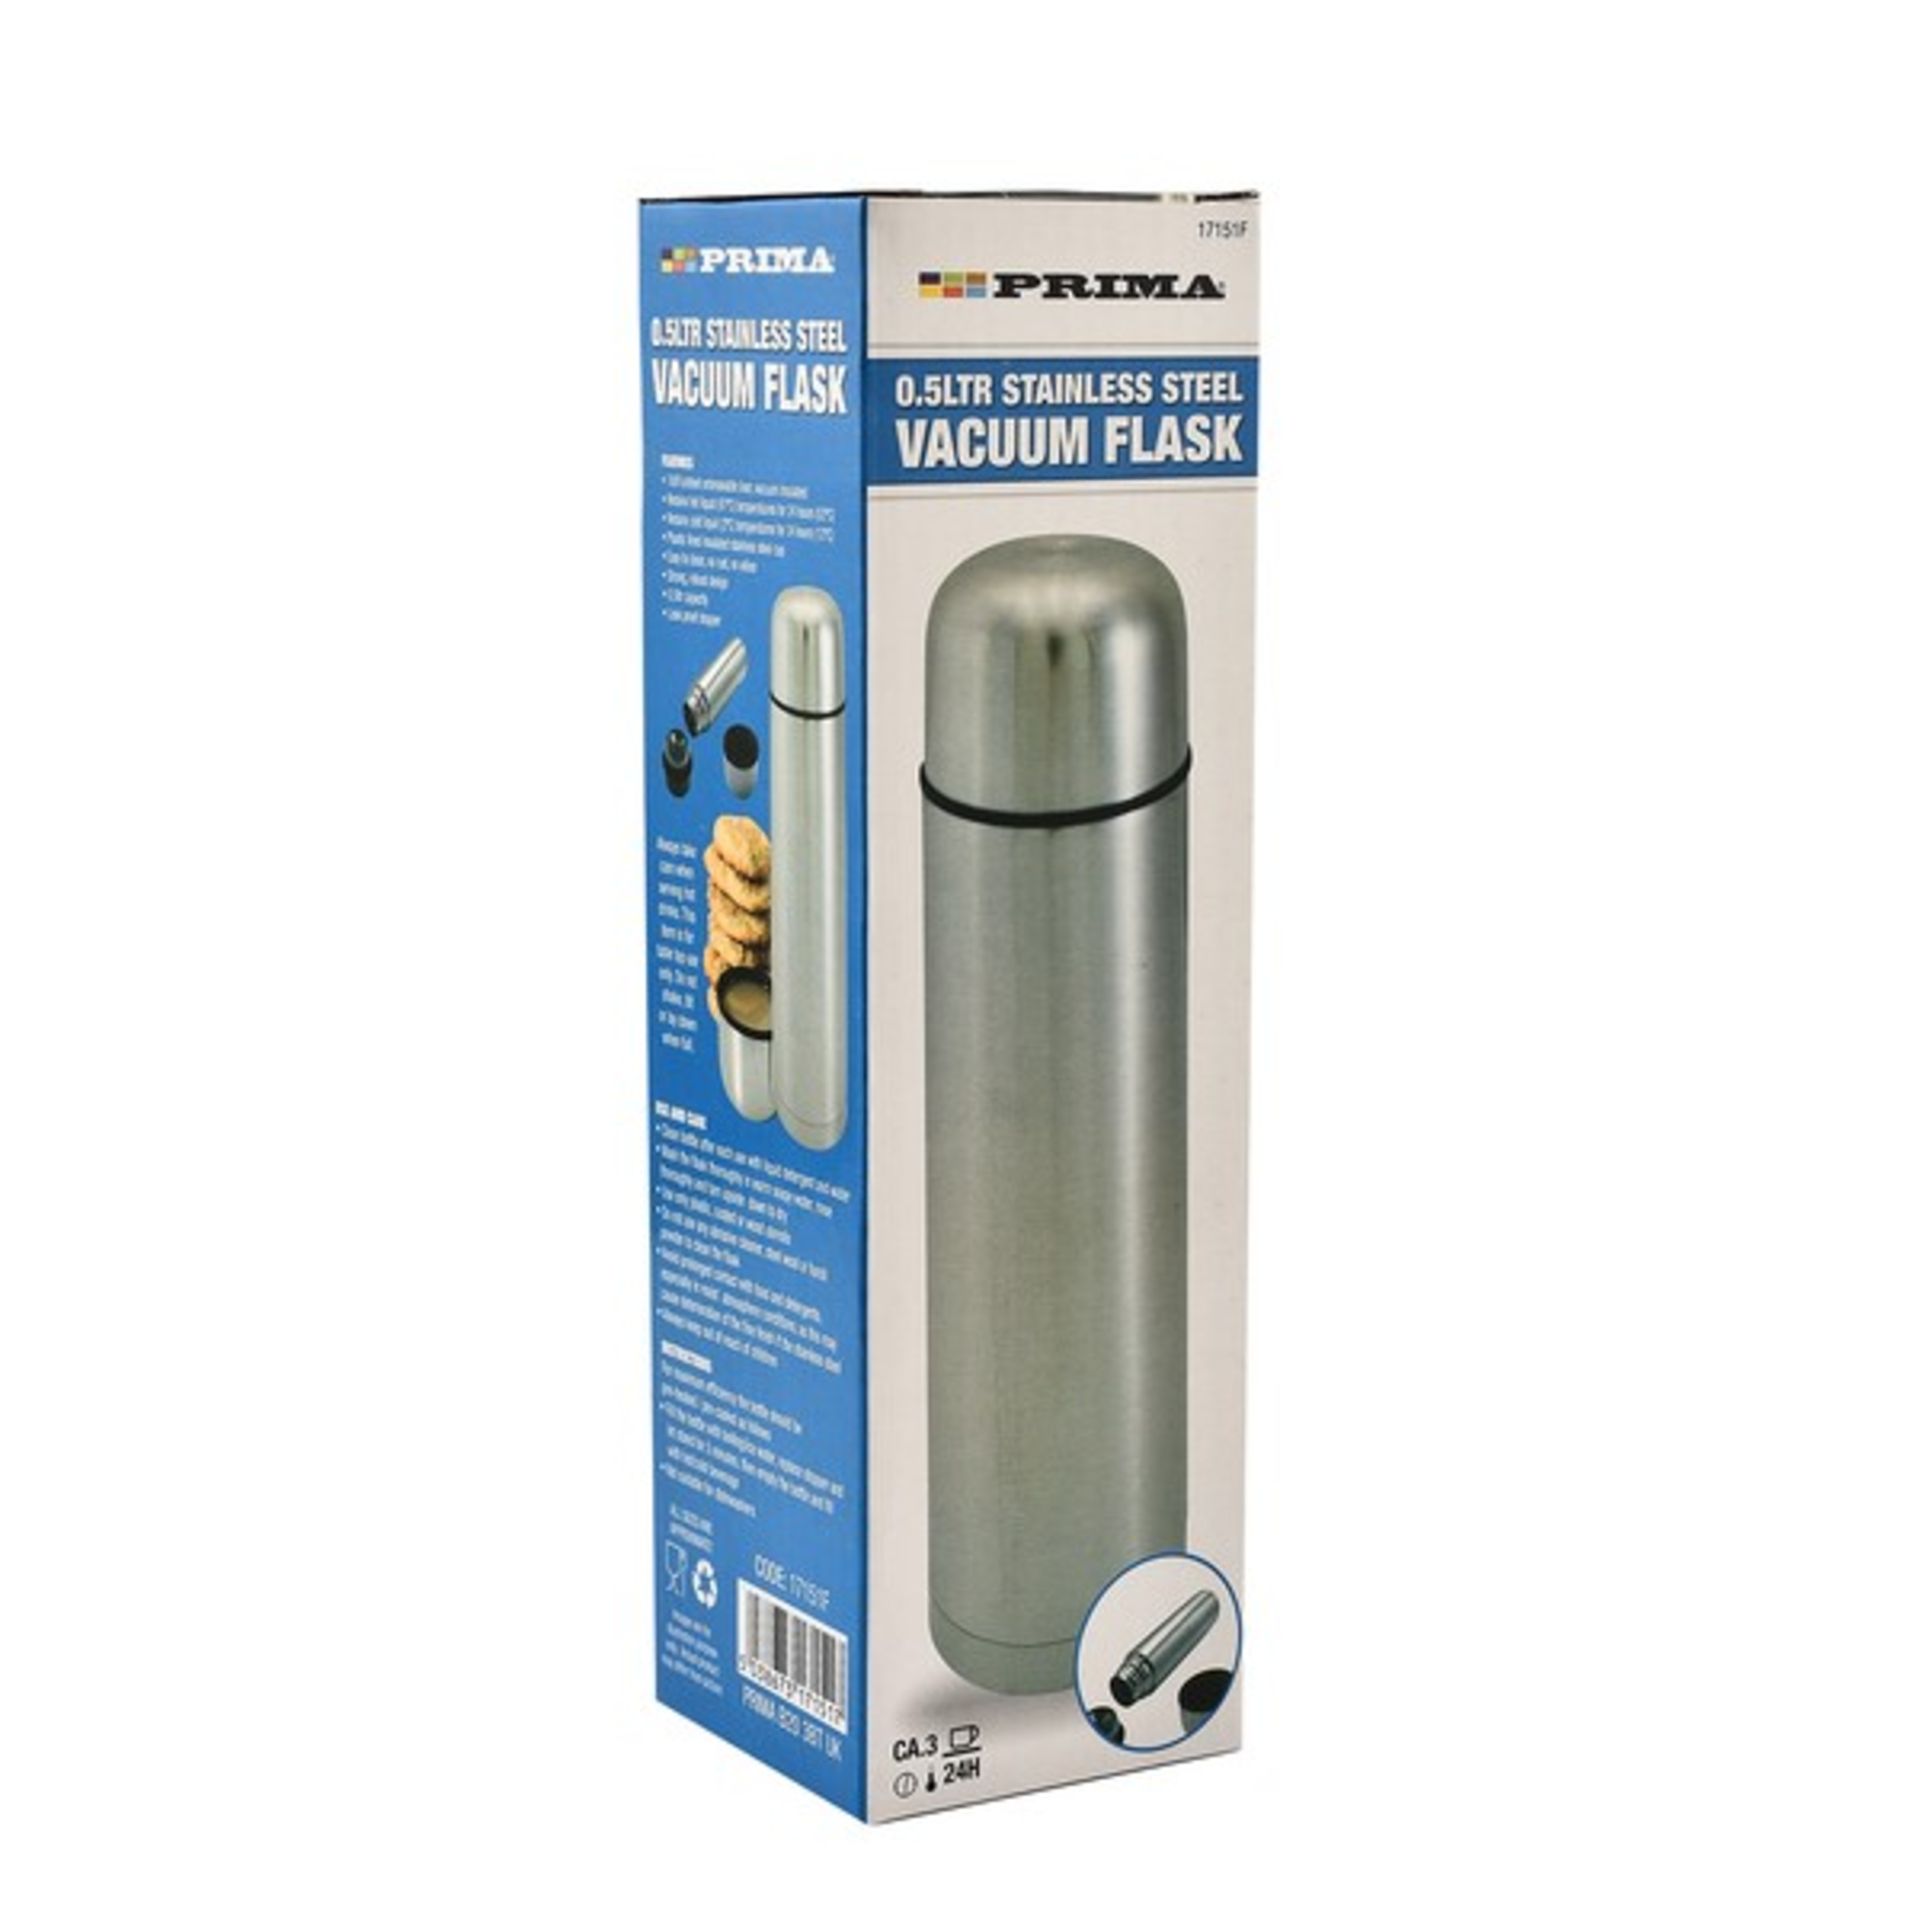 New Prima 0.5LTR Stainless Steel Vacuum Flask